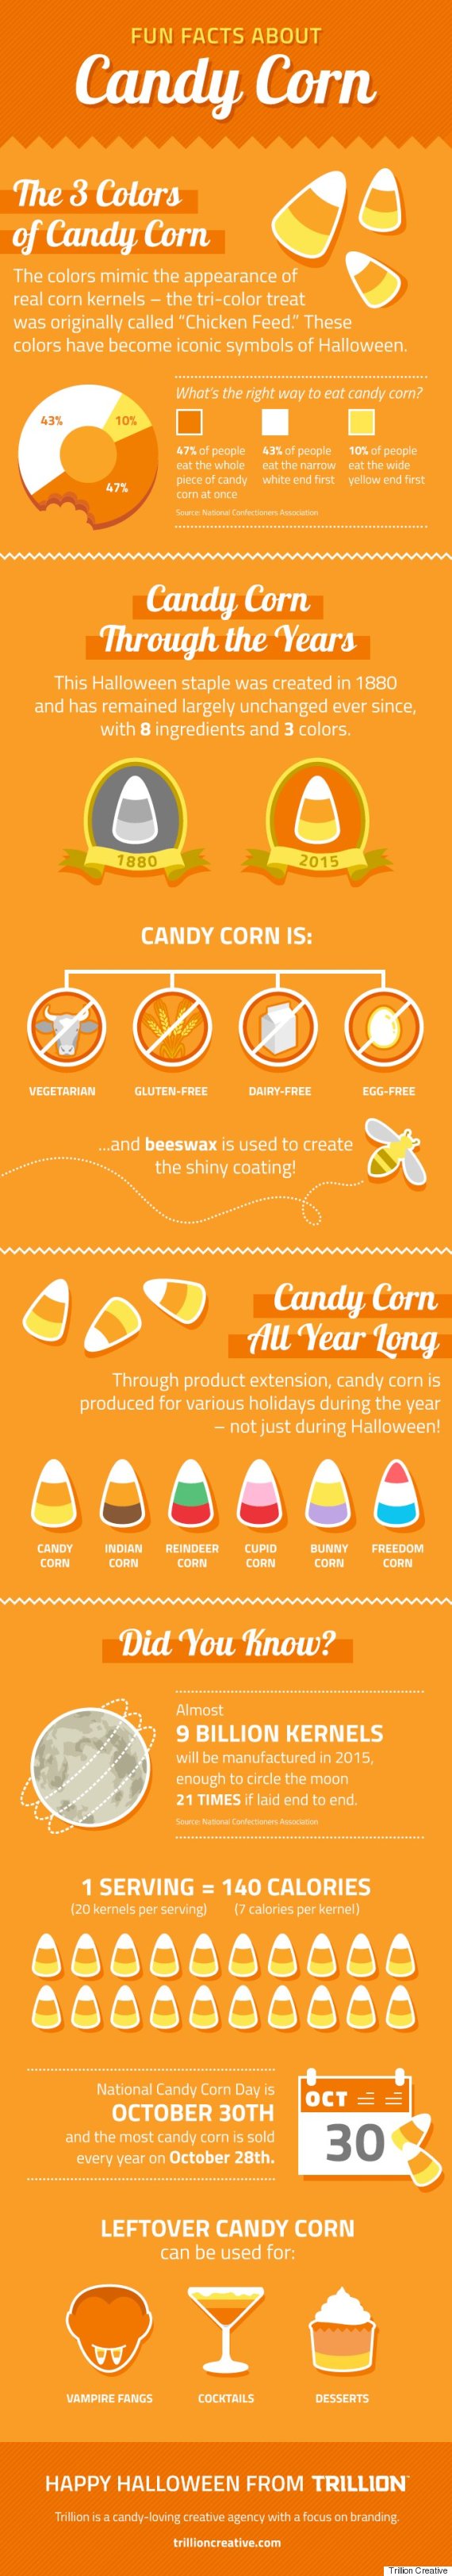 fun-facts-about-candy-corn-plus-tips-for-how-to-use-leftovers